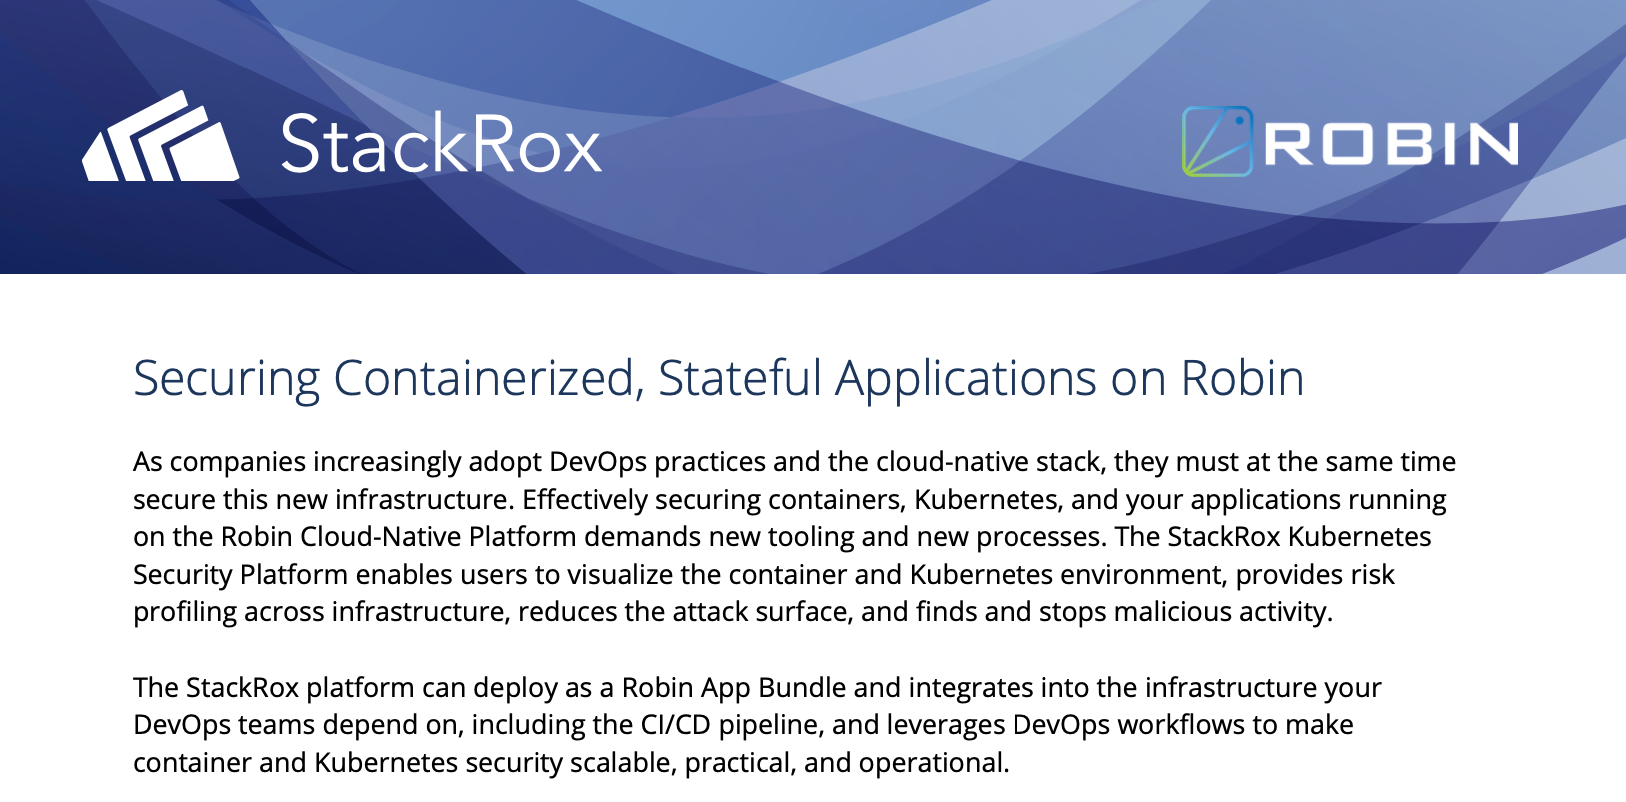 Robin and StackRox: Securing Containerized, Stateful Applications